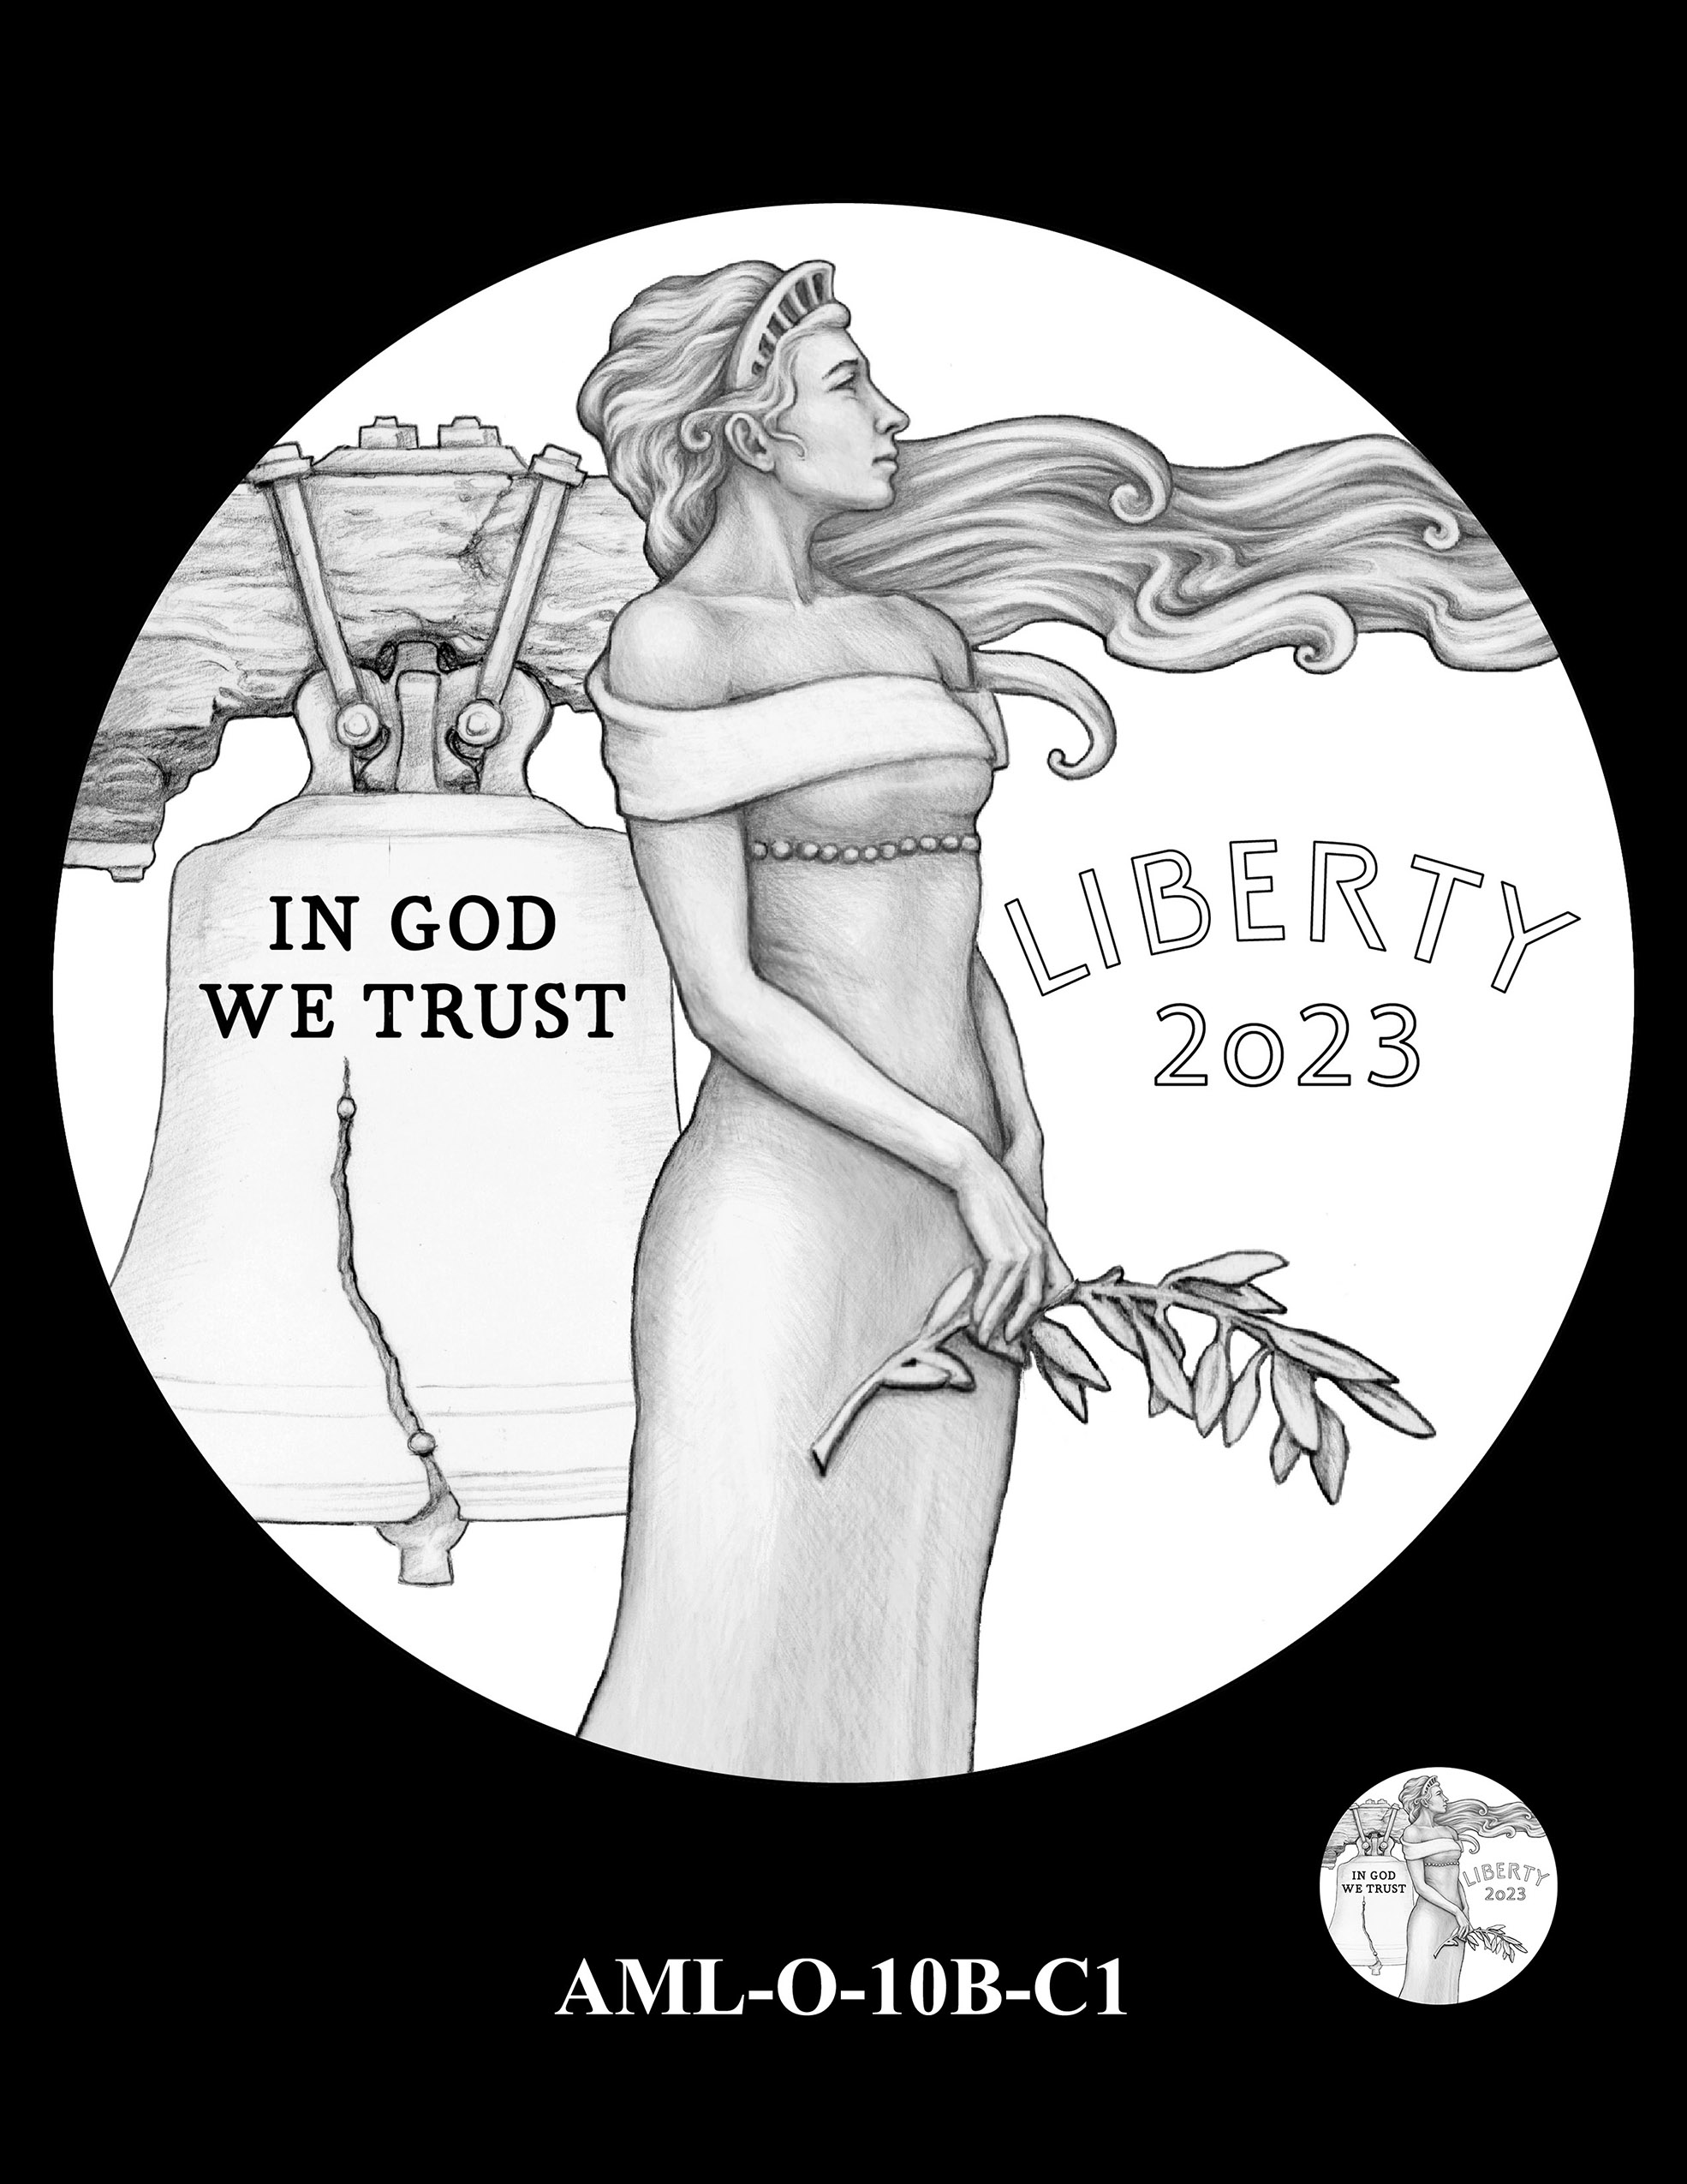 AML-O-10B-C1 -- 2023 American Liberty High Relief 24k Gold and Silver Medal Program